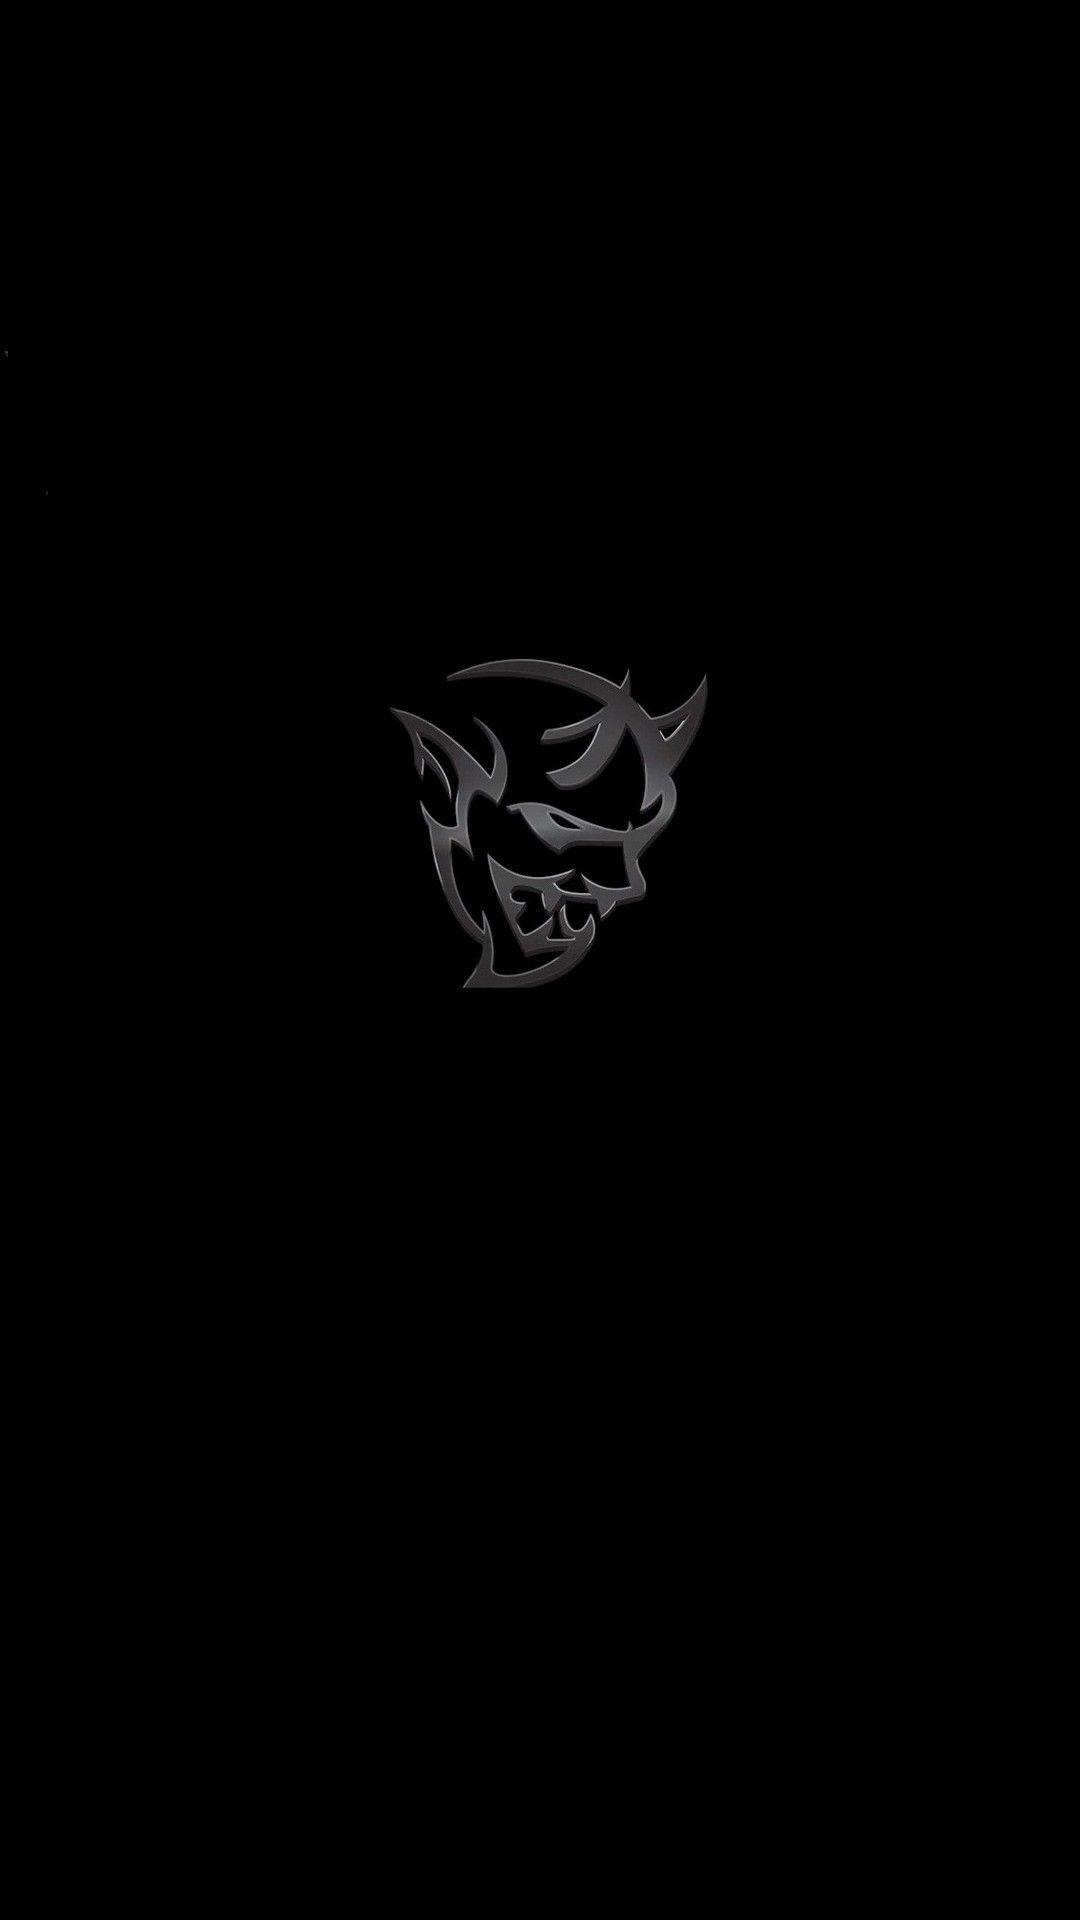 Black and White Dodge Hellcat Logo - Android Wallpaper Dodge Demon Logo. y. Dodge, Wallpaper